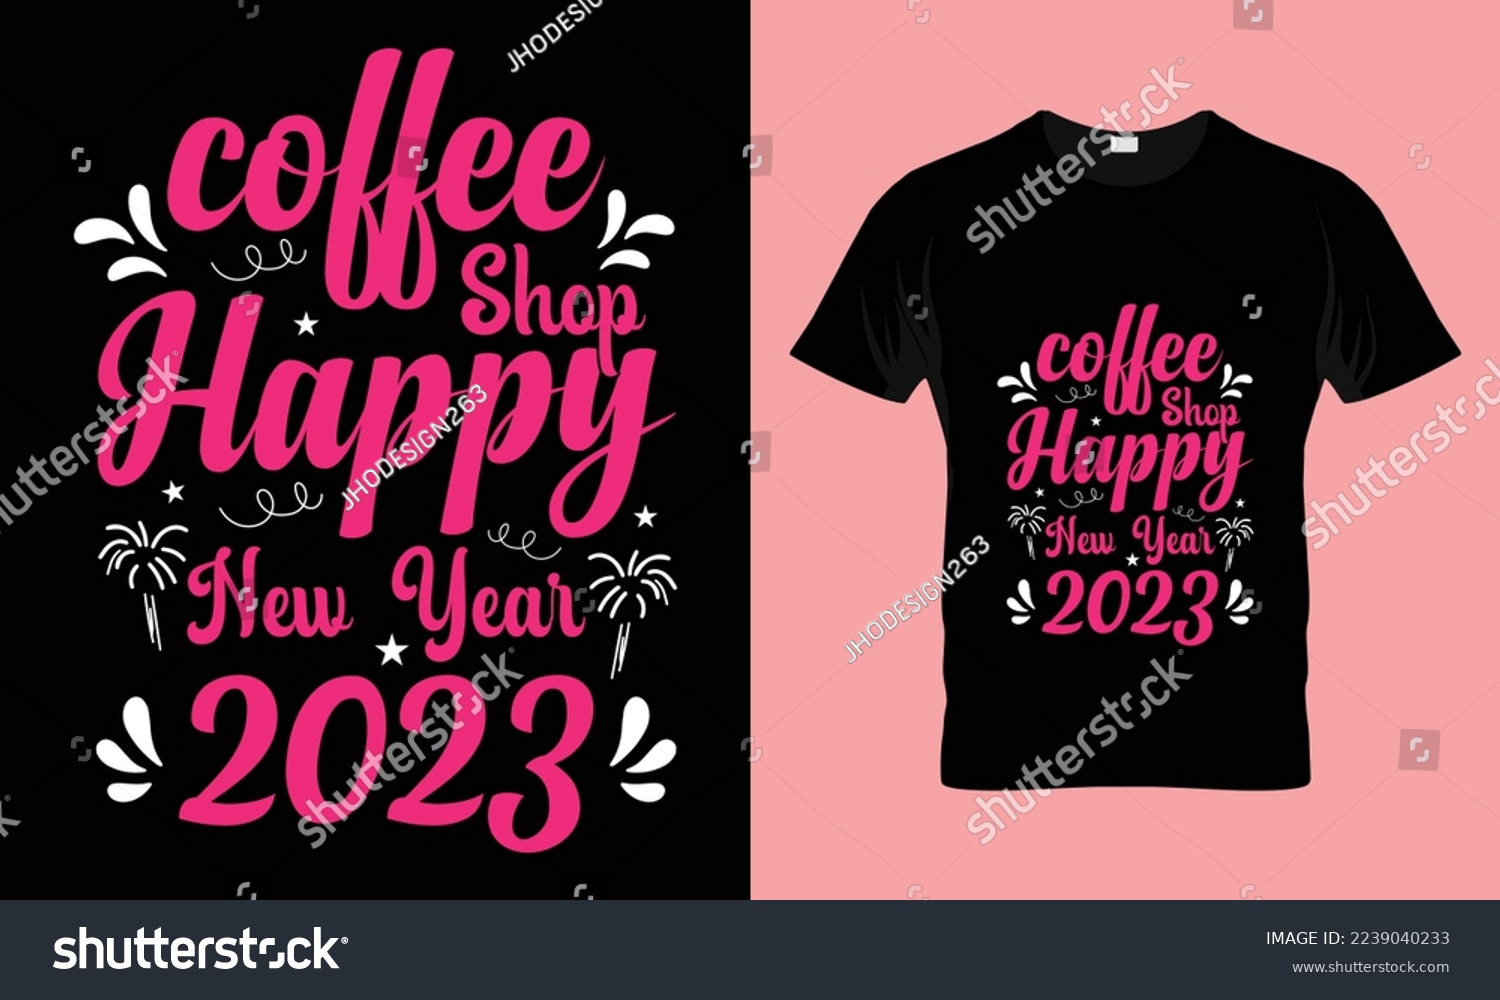 SVG of coffee shop happy new year 2023 design template vector and typography.
Ready for t-shirt, mug,gift and other printing,2023 svg design,New Year Stickers quotes t shirt designs
Happy new year svg.
 svg